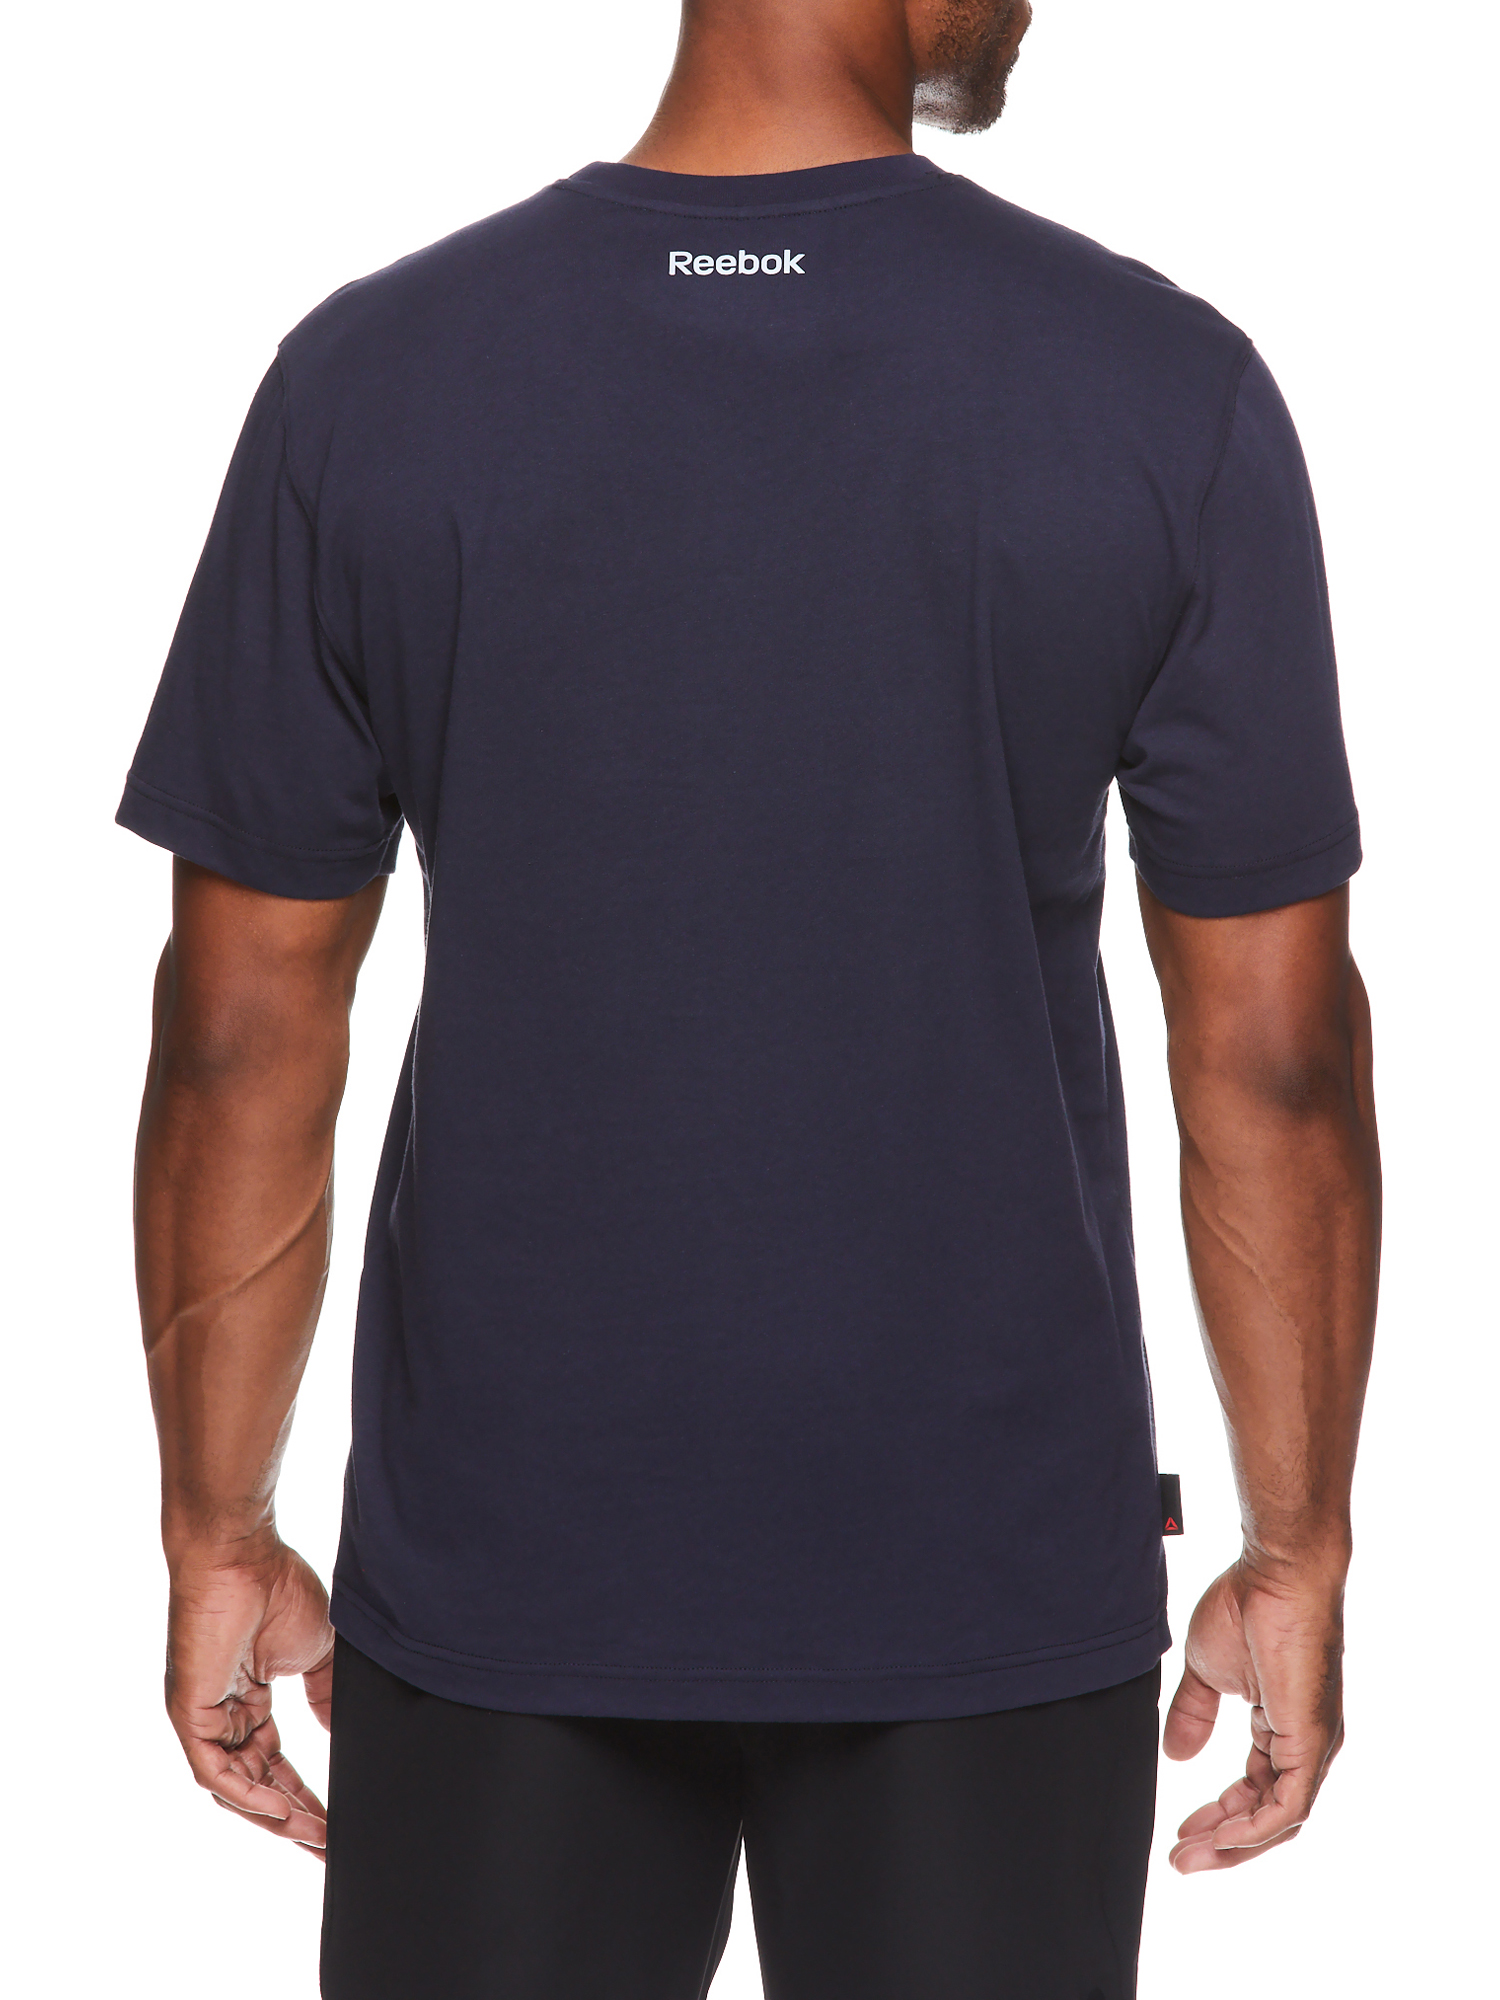 Reebok Men's and Big Men's Active Hiit Graphic Training Tee, up to Size 3XL - image 3 of 4